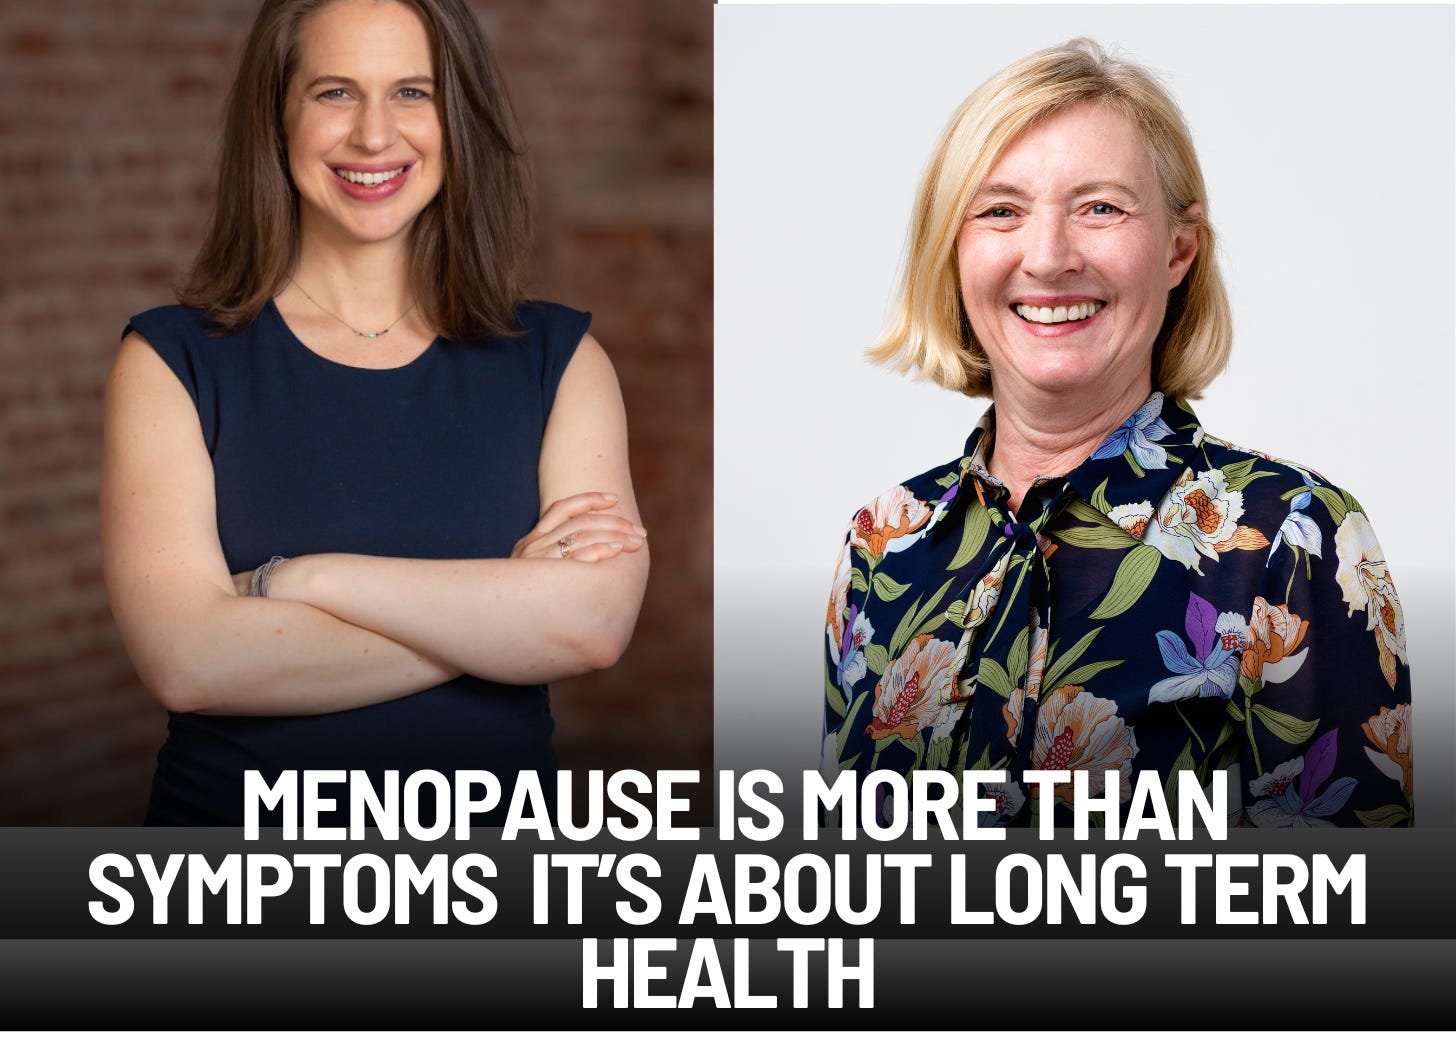 SE 6 EP 14 Menopause is More Than Symptoms It's About Our Long-Term Health